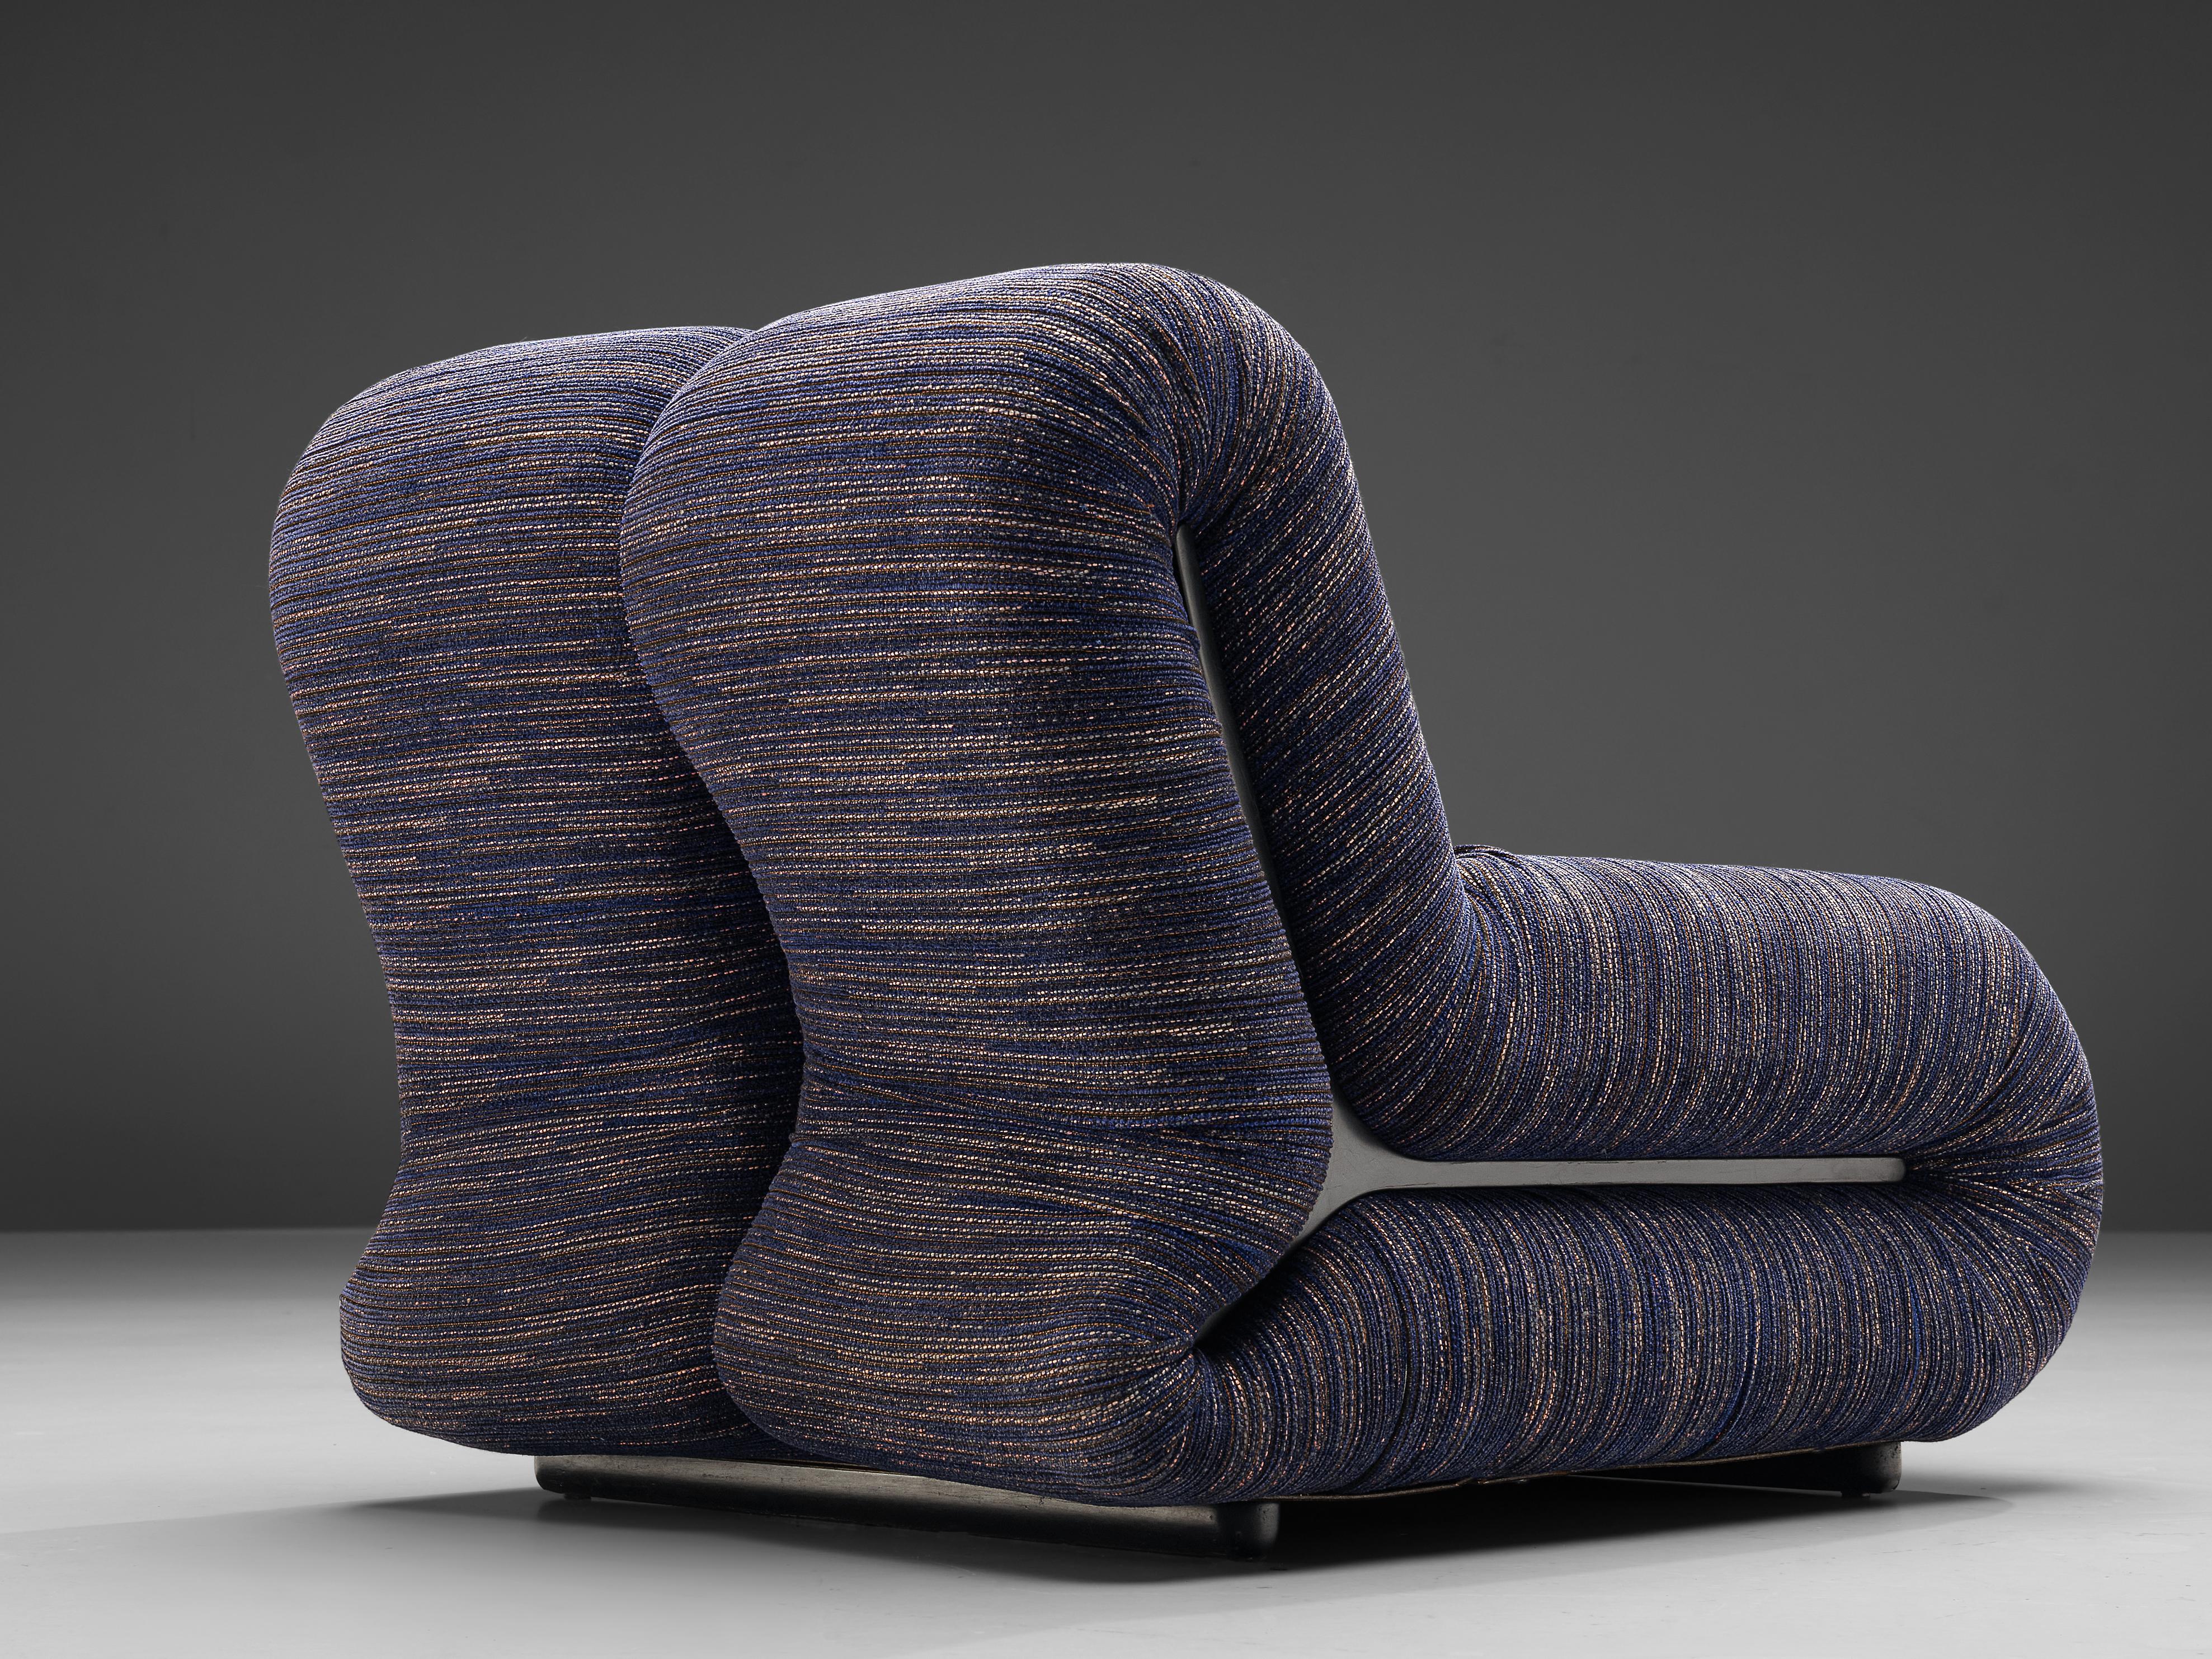 Claudio Vagnoni for 1P, pair of lounge chairs model ‘Pagru’, blue fabric upholstery, Italy, 1968

Wonderful pair of ‘Pagru’ lounge chairs designed in Italy by Claudio Vagnoni, manufactured by 1P in 1969. Two L-shaped forms are attached together what